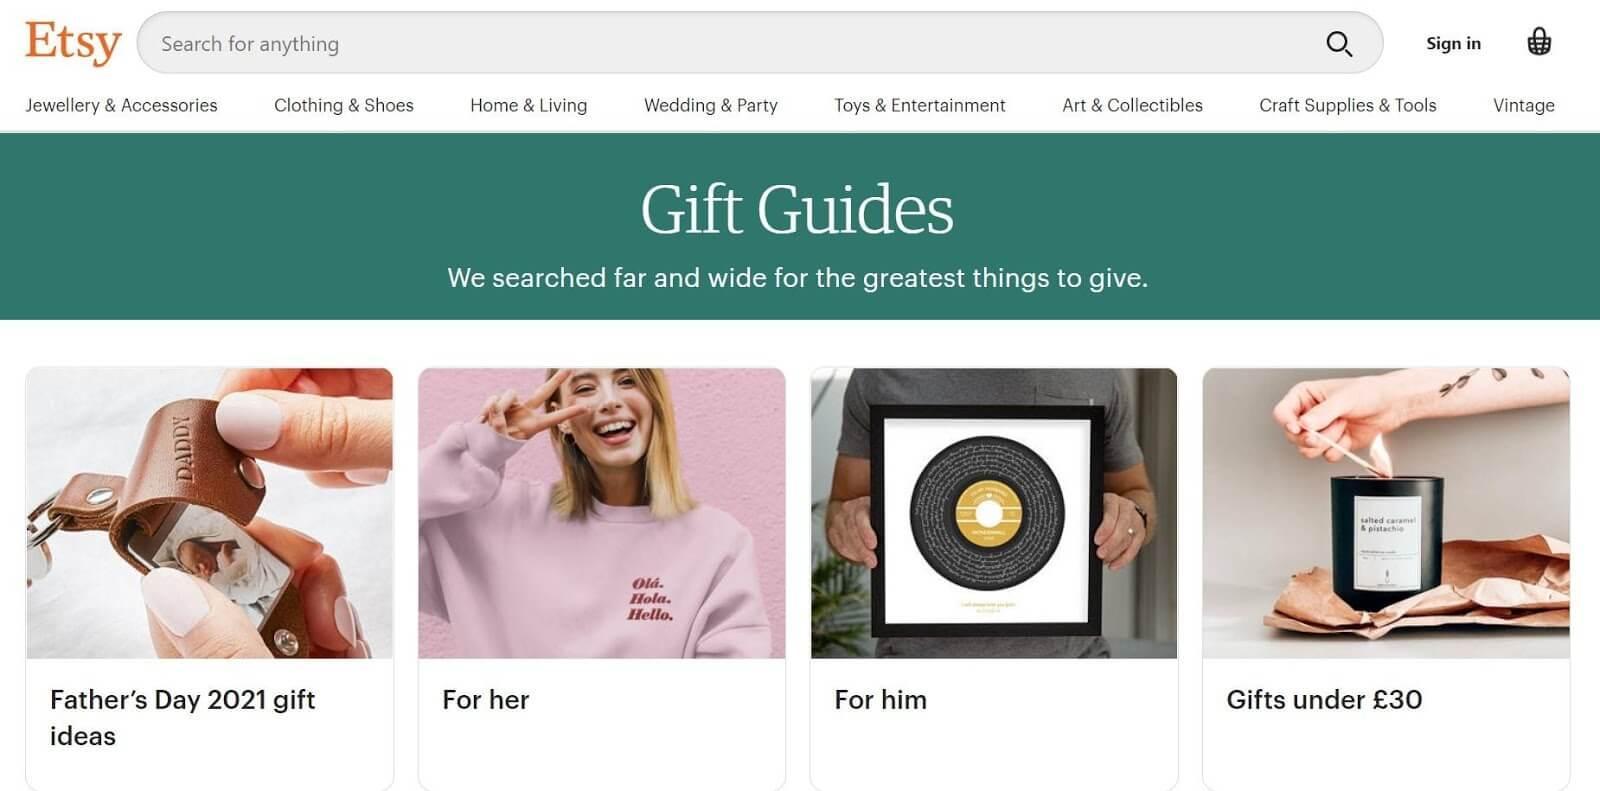 Etsy gift guides